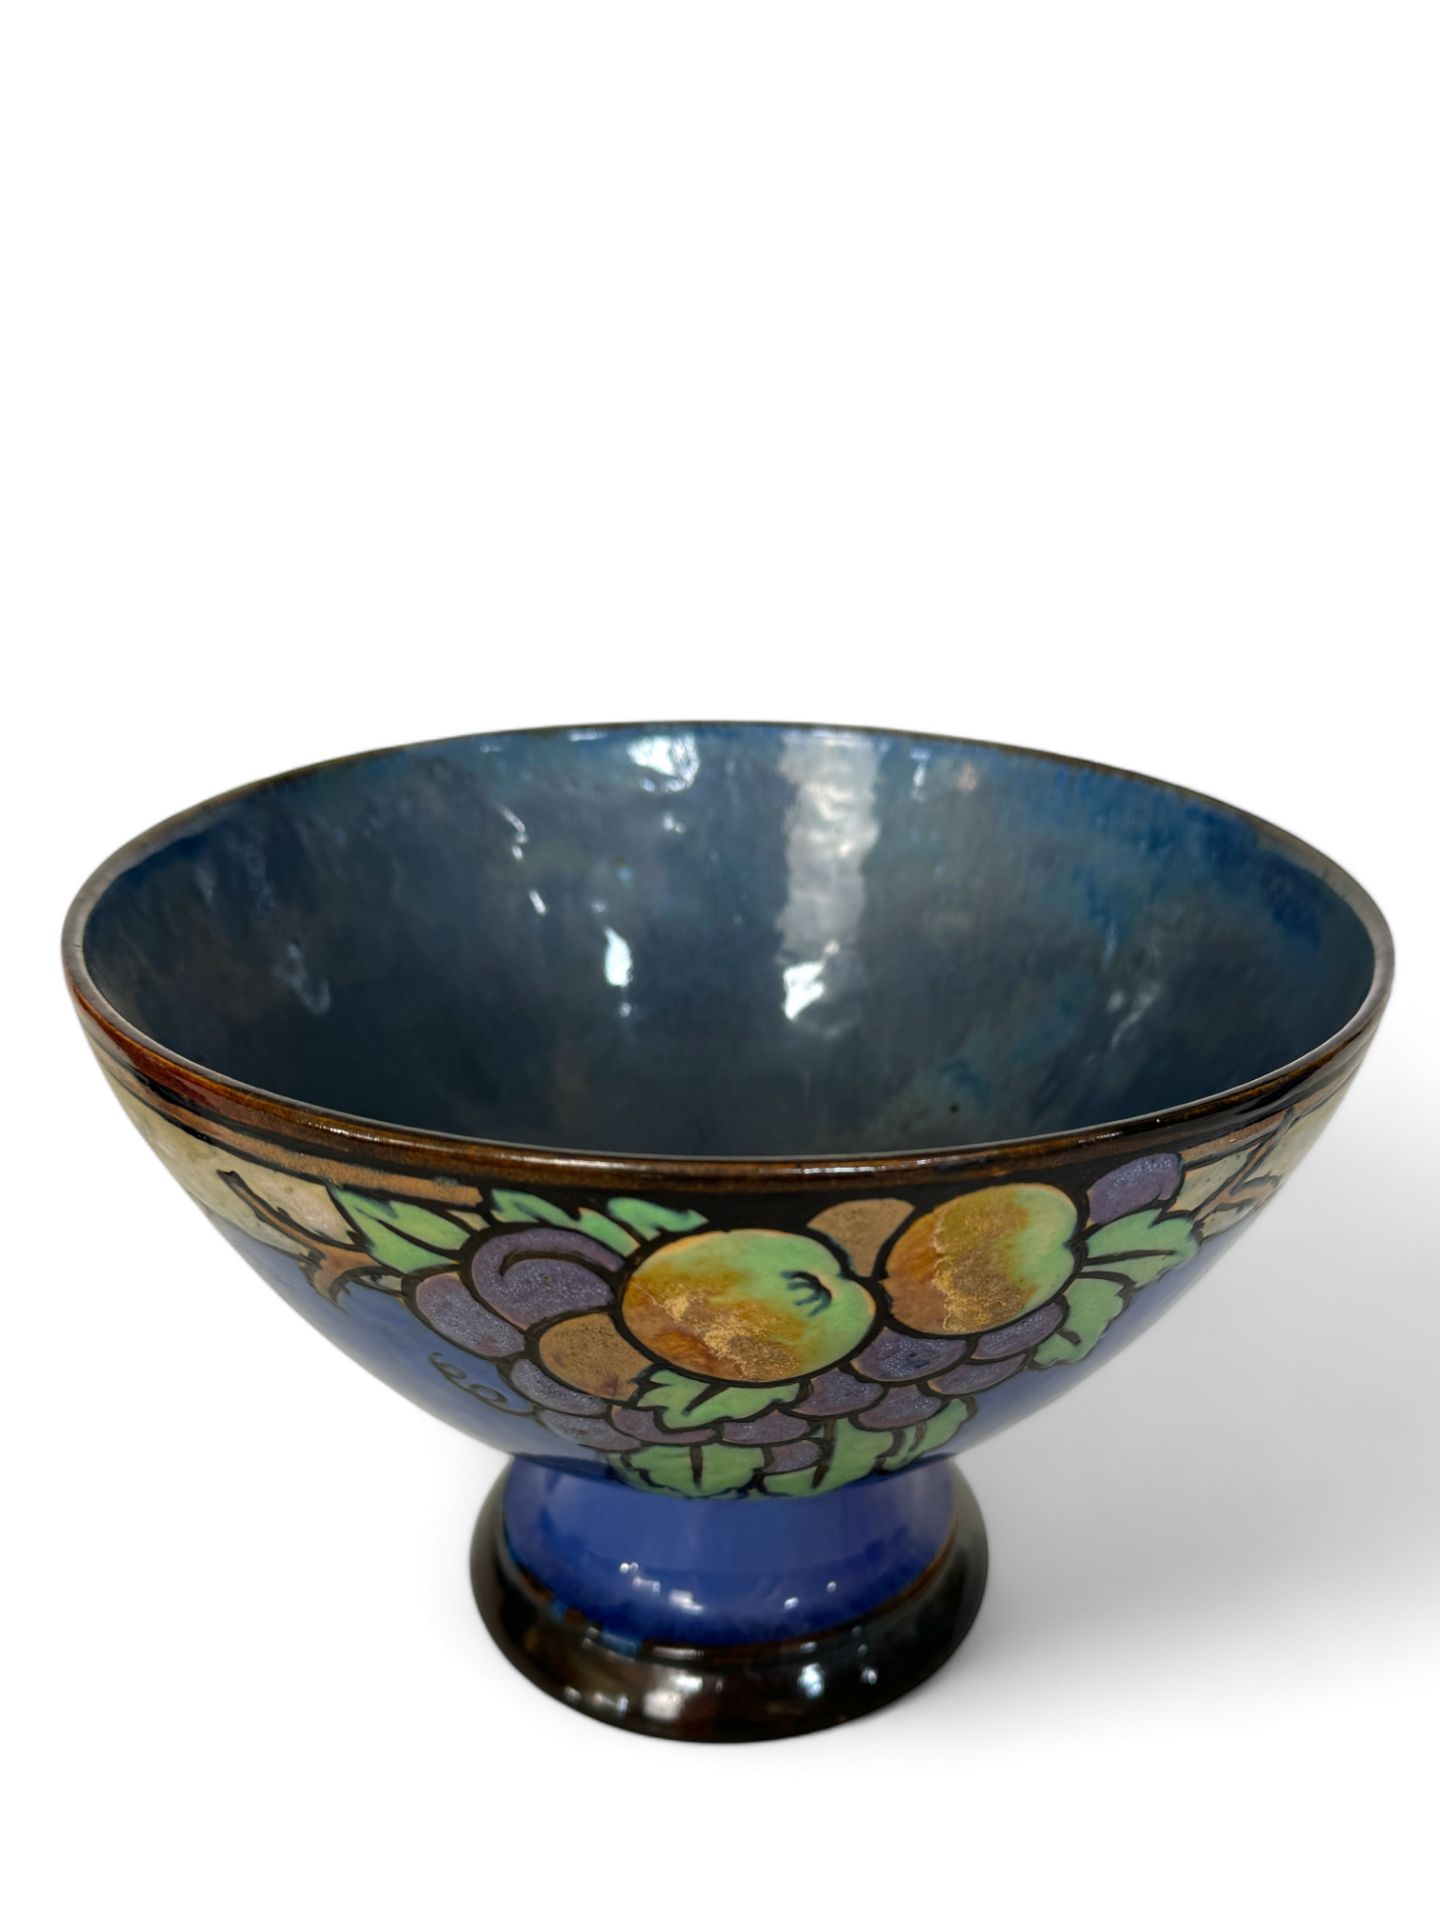 Two similar Royal Doulton vases and a similar footed fruit bowl - Image 6 of 7